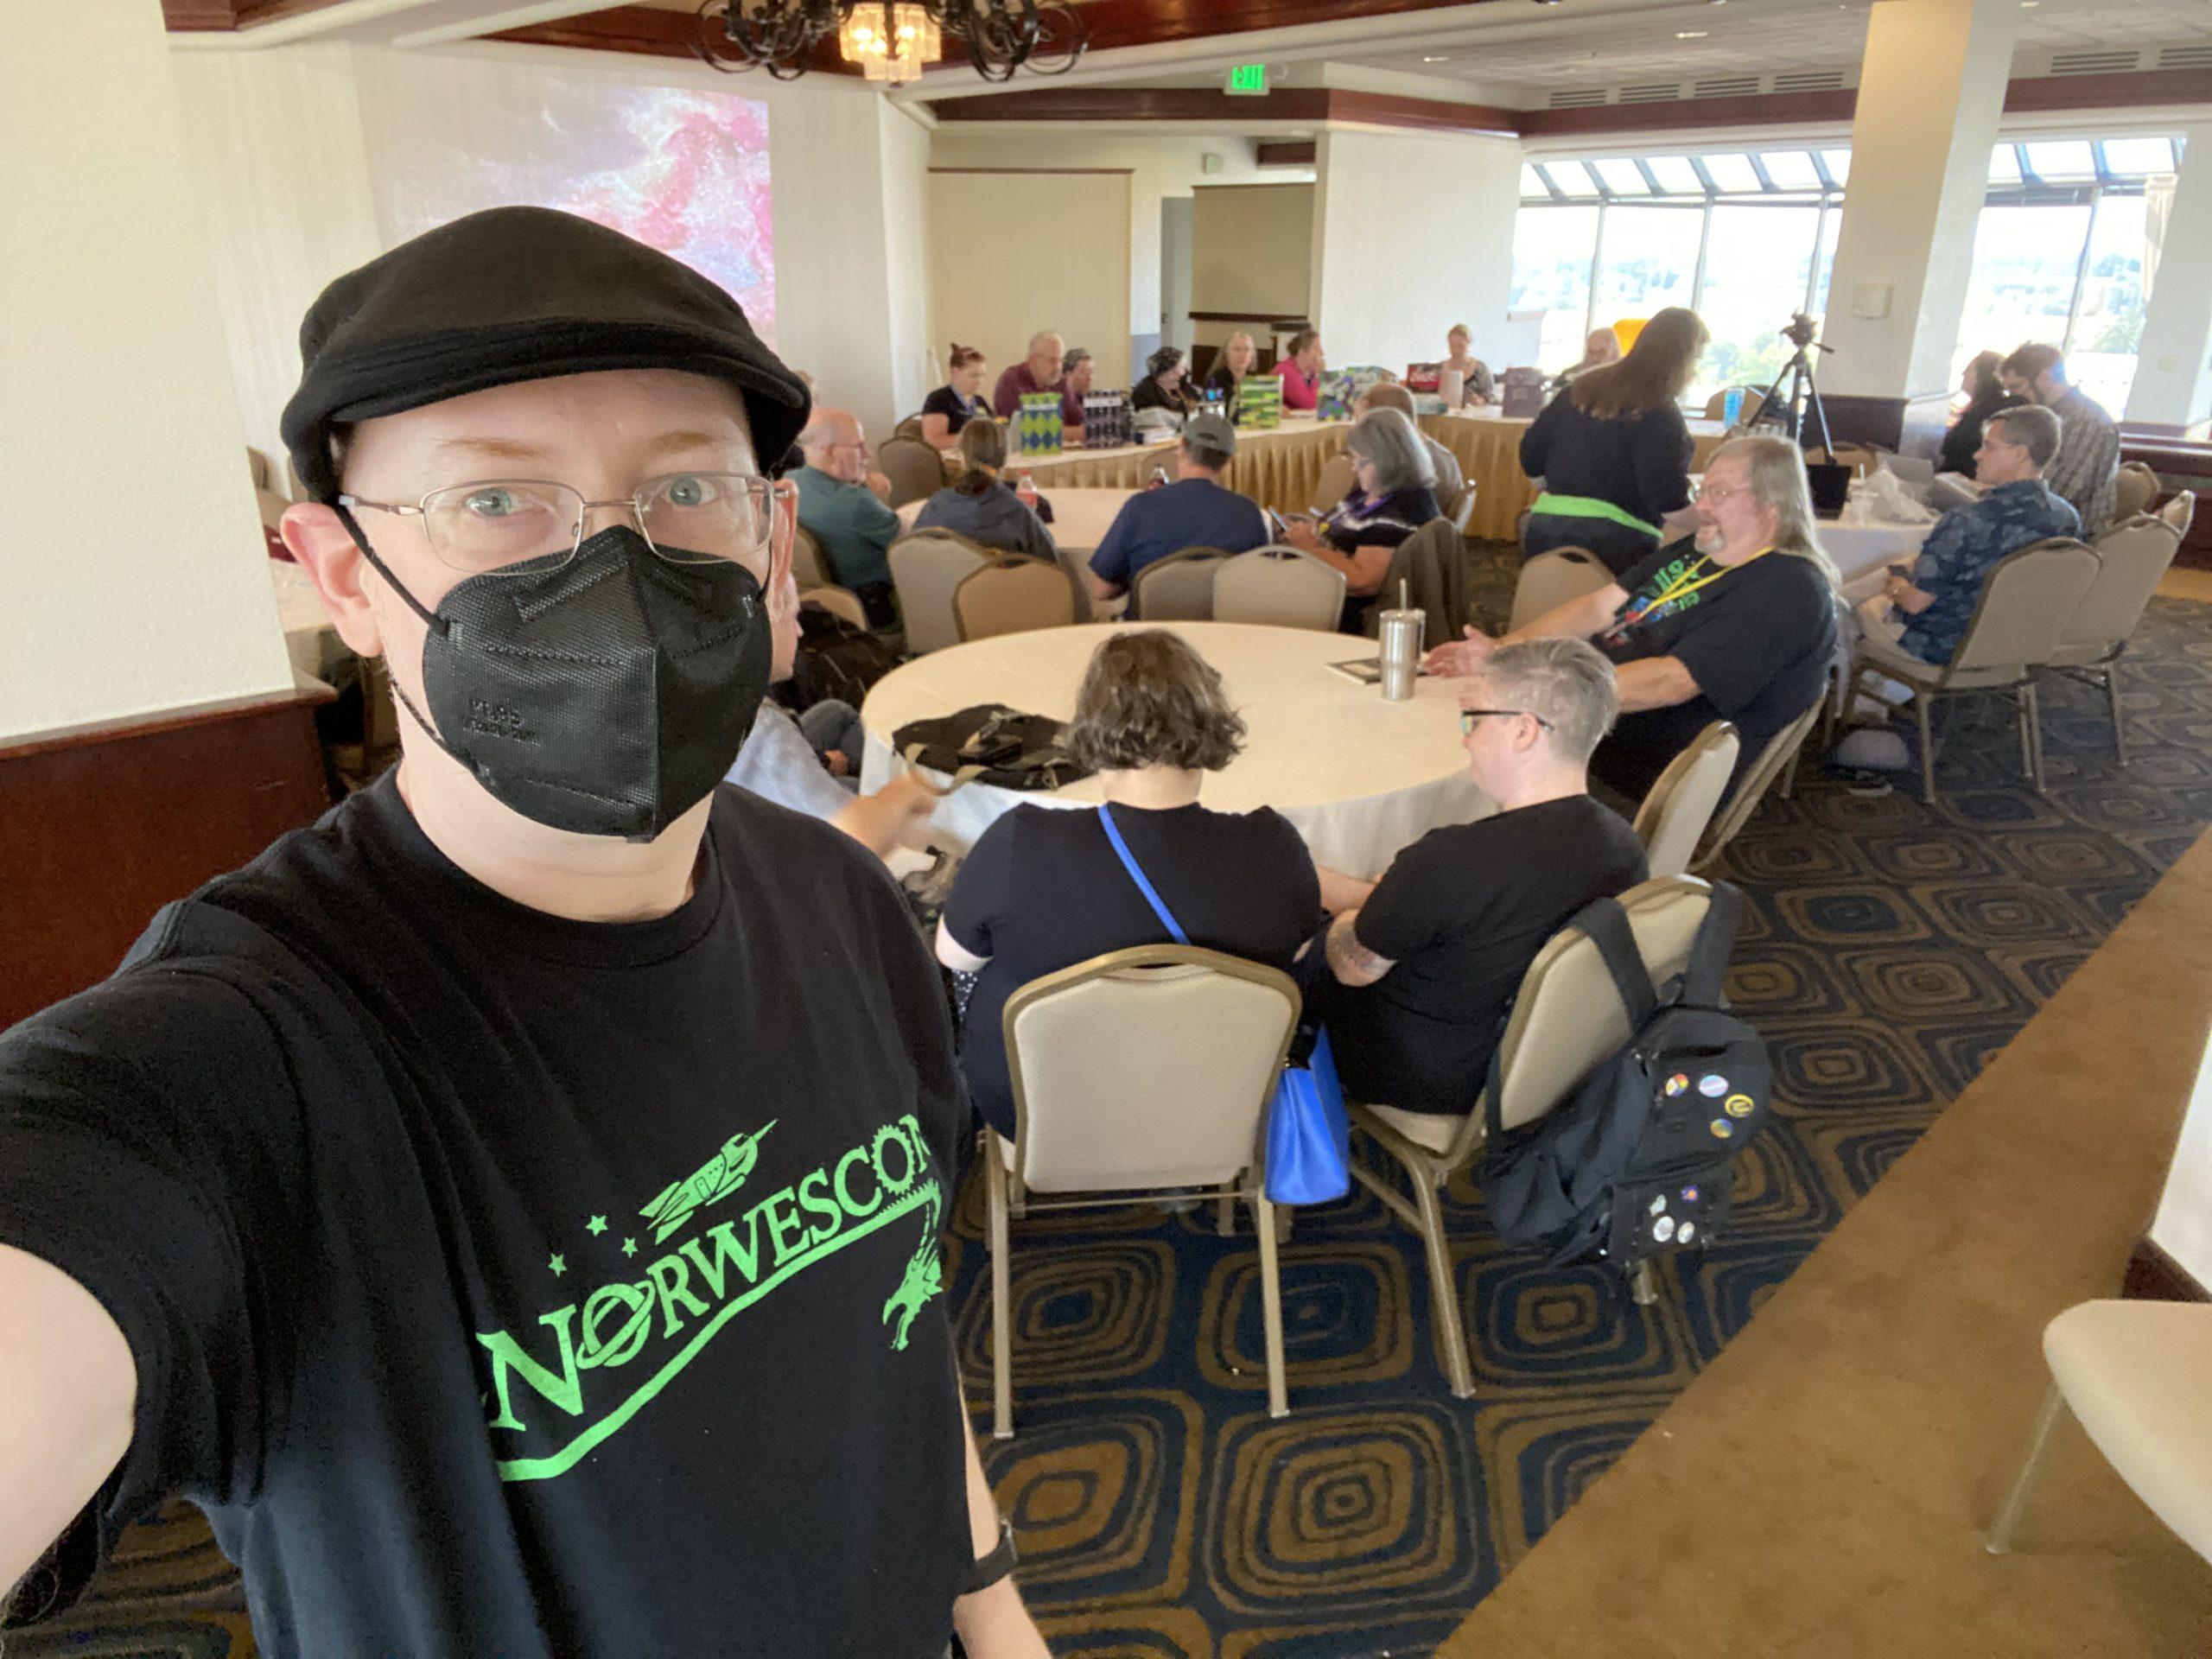 Me, wearing a black cap, mask, and t-shirt with the Norwescon logo in green, in a hotel conference room with other people sitting around a number of round tables.